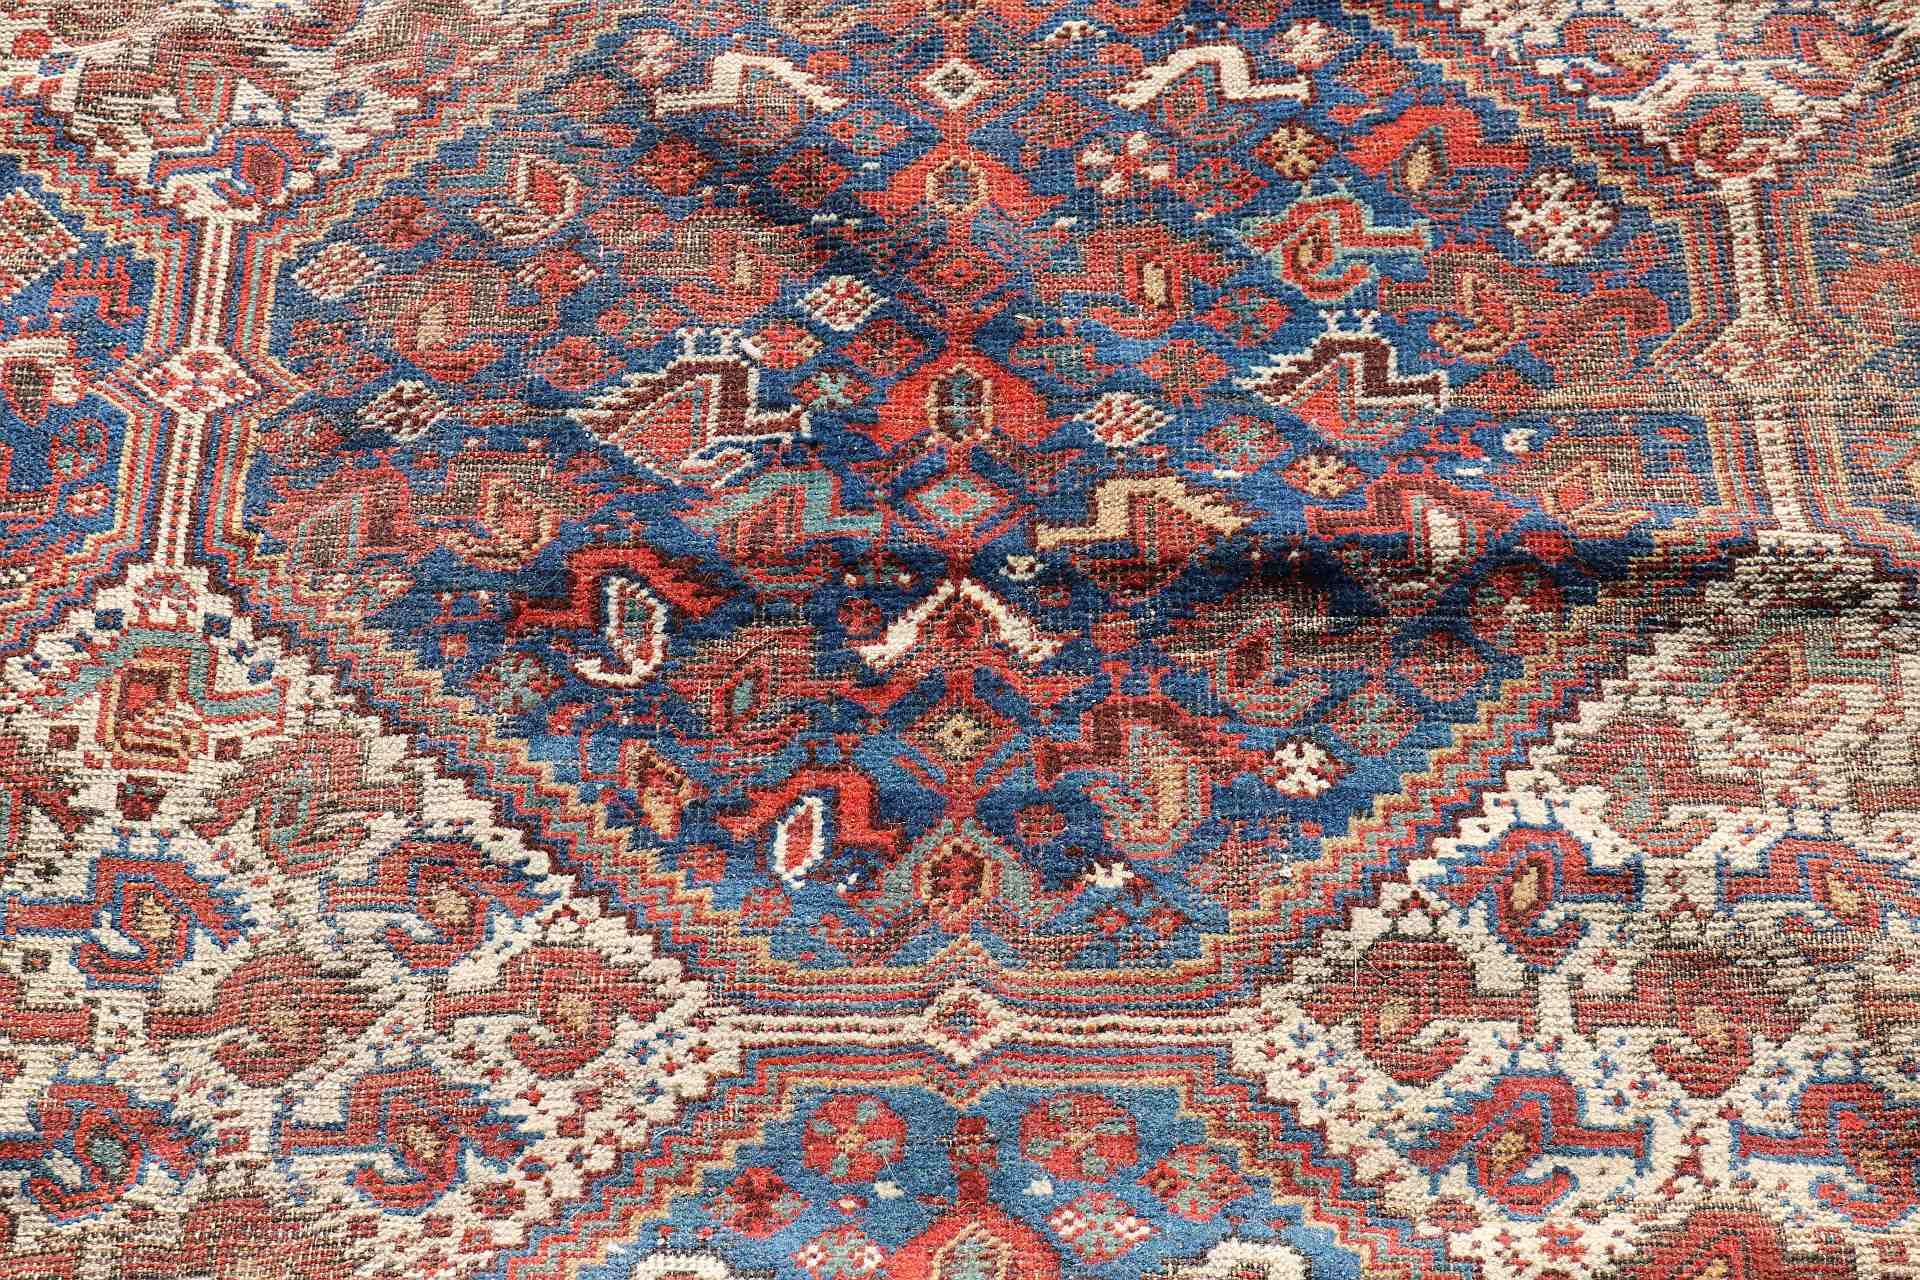 Large Persian rug, 295 x 220 cm. - Image 2 of 3